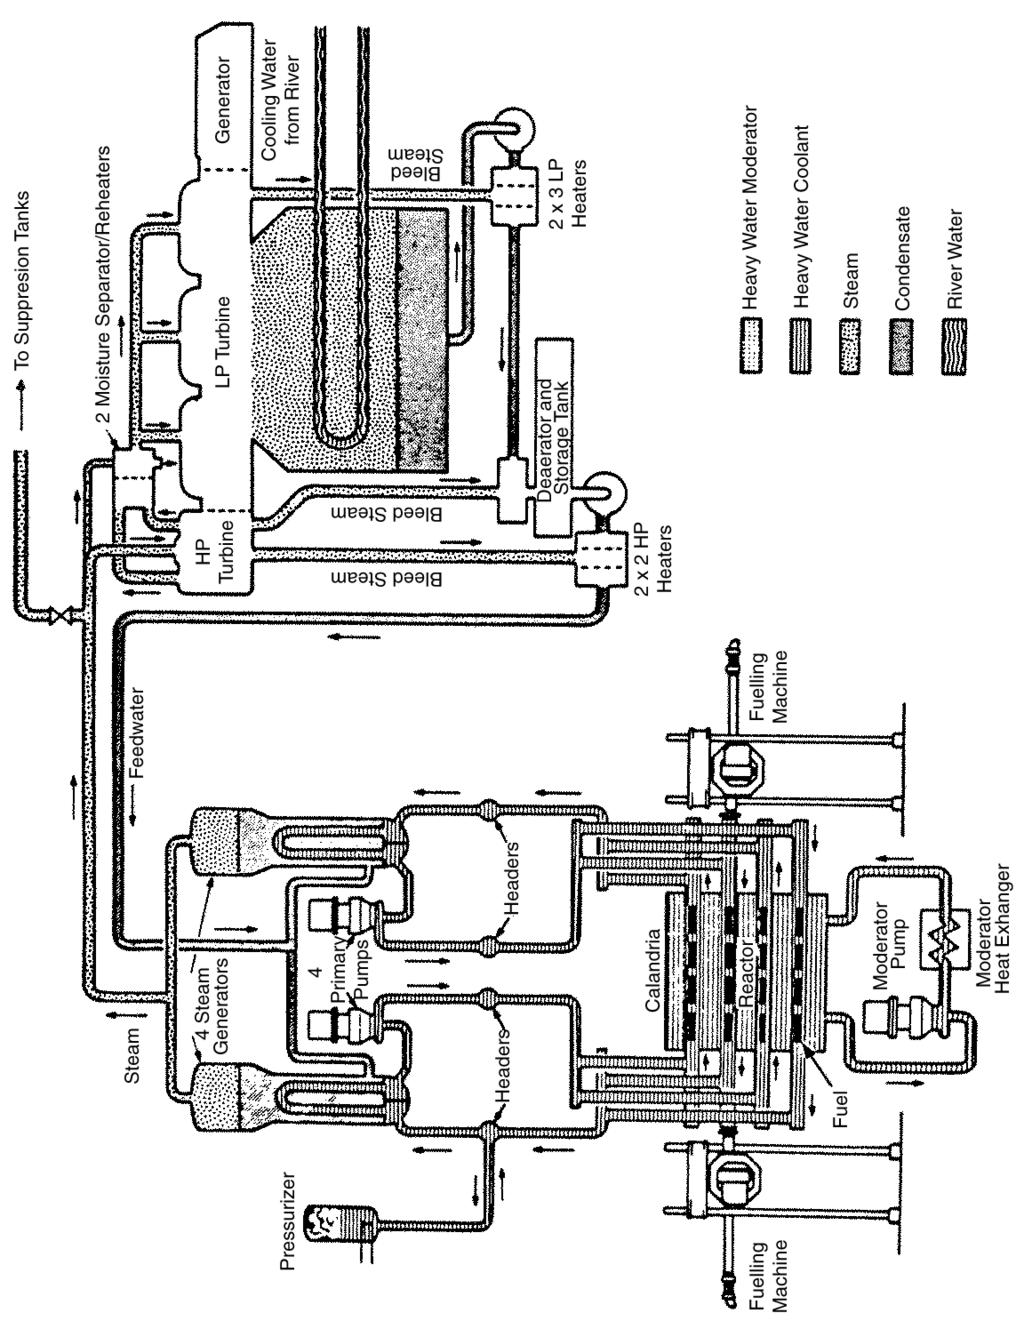 Fig. 3.9: CANDU nuclear power system: secondary side. 4 CANDU Primary Circuit Heat Balance 4.